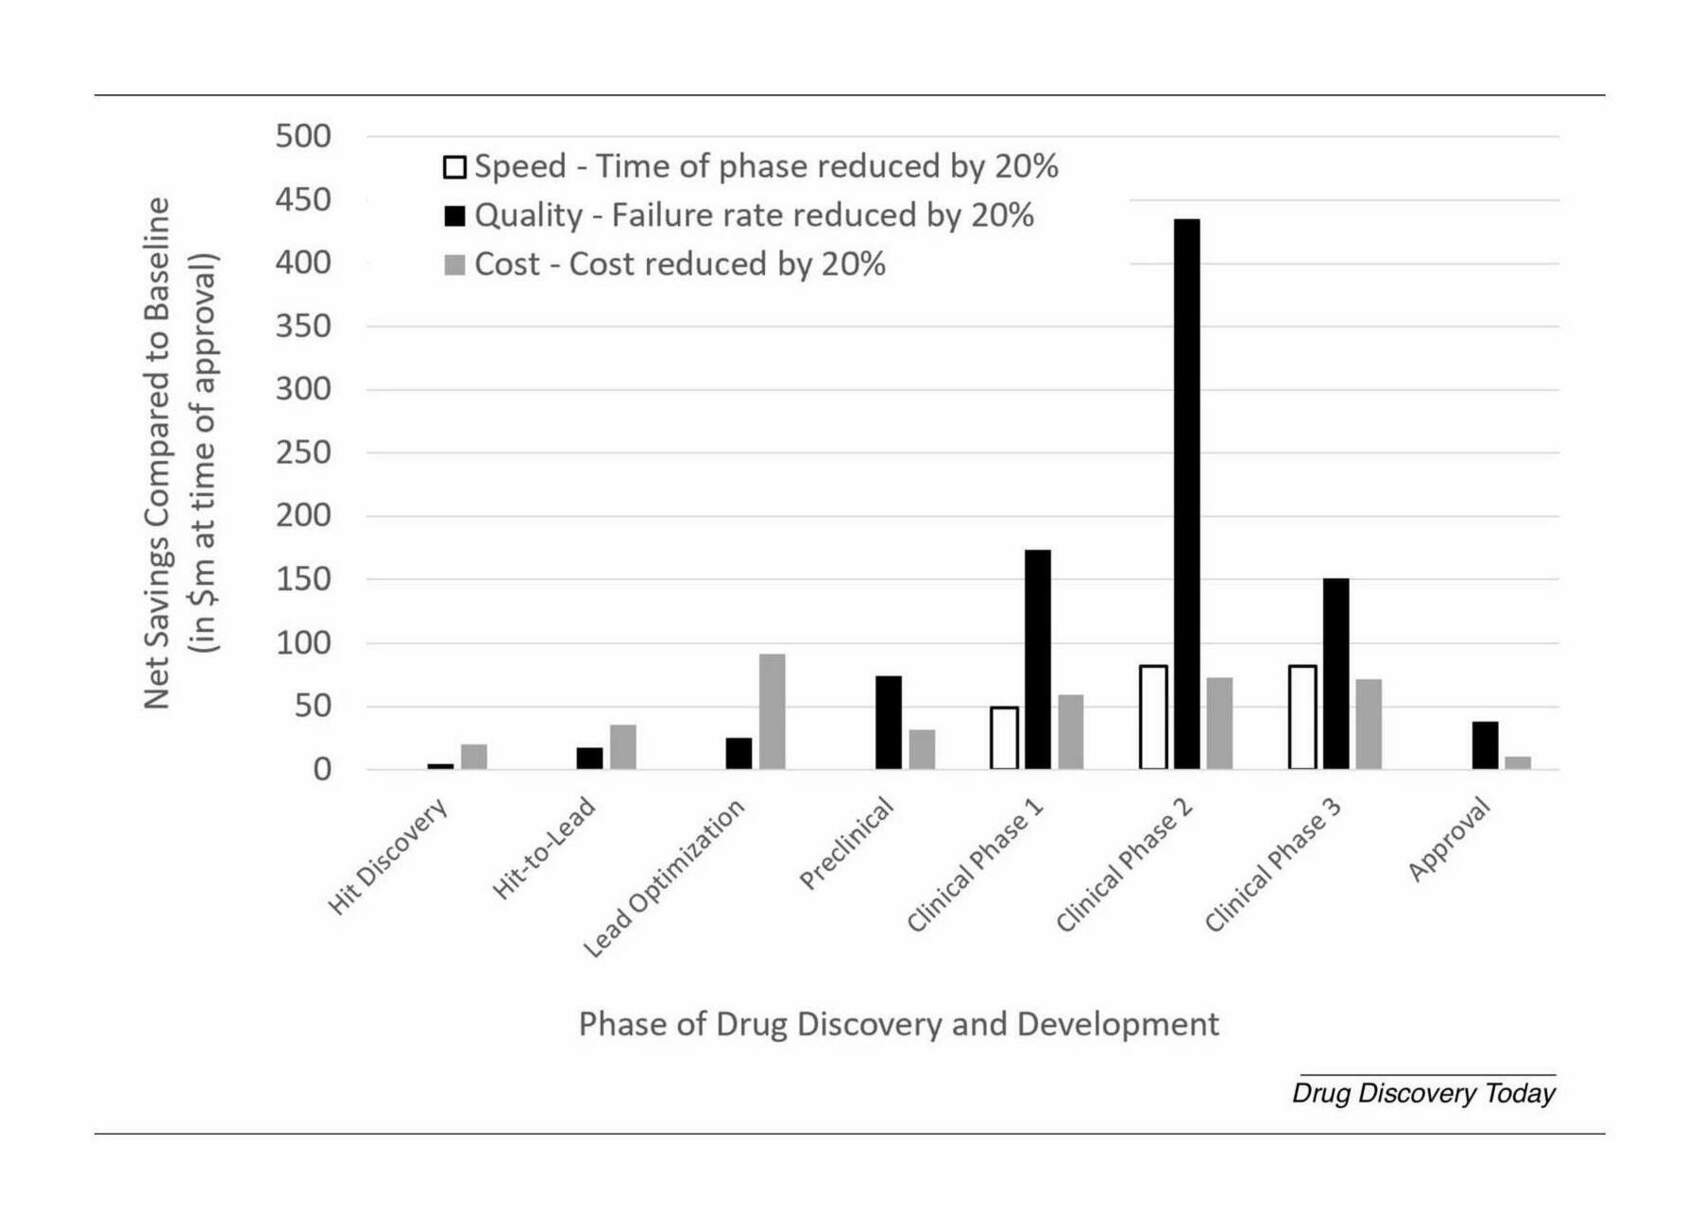 Figure 2: The impact of increasing speed (with the time taken for each phase reduced by 20%), improving the quality of the compounds tested in each phase (with the failure rate reduced by 20%), and decreasing costs (by 20%) on the net profit of a drug-discovery project, assuming patenting at time of first in human tests, and with other assumptions based on [“When Quality Beats Quantity: Decision Theory, Drug Discovery, and the Reproducibility Crisis”, Scannell & Bosley 2016]. It can be seen that the quality of compounds taken forward has a much more profound impact on the success of projects, far beyond improving the speed and reducing the cost of the respective phase. This has implications for the most beneficial uses of AI in drug-discovery projects.